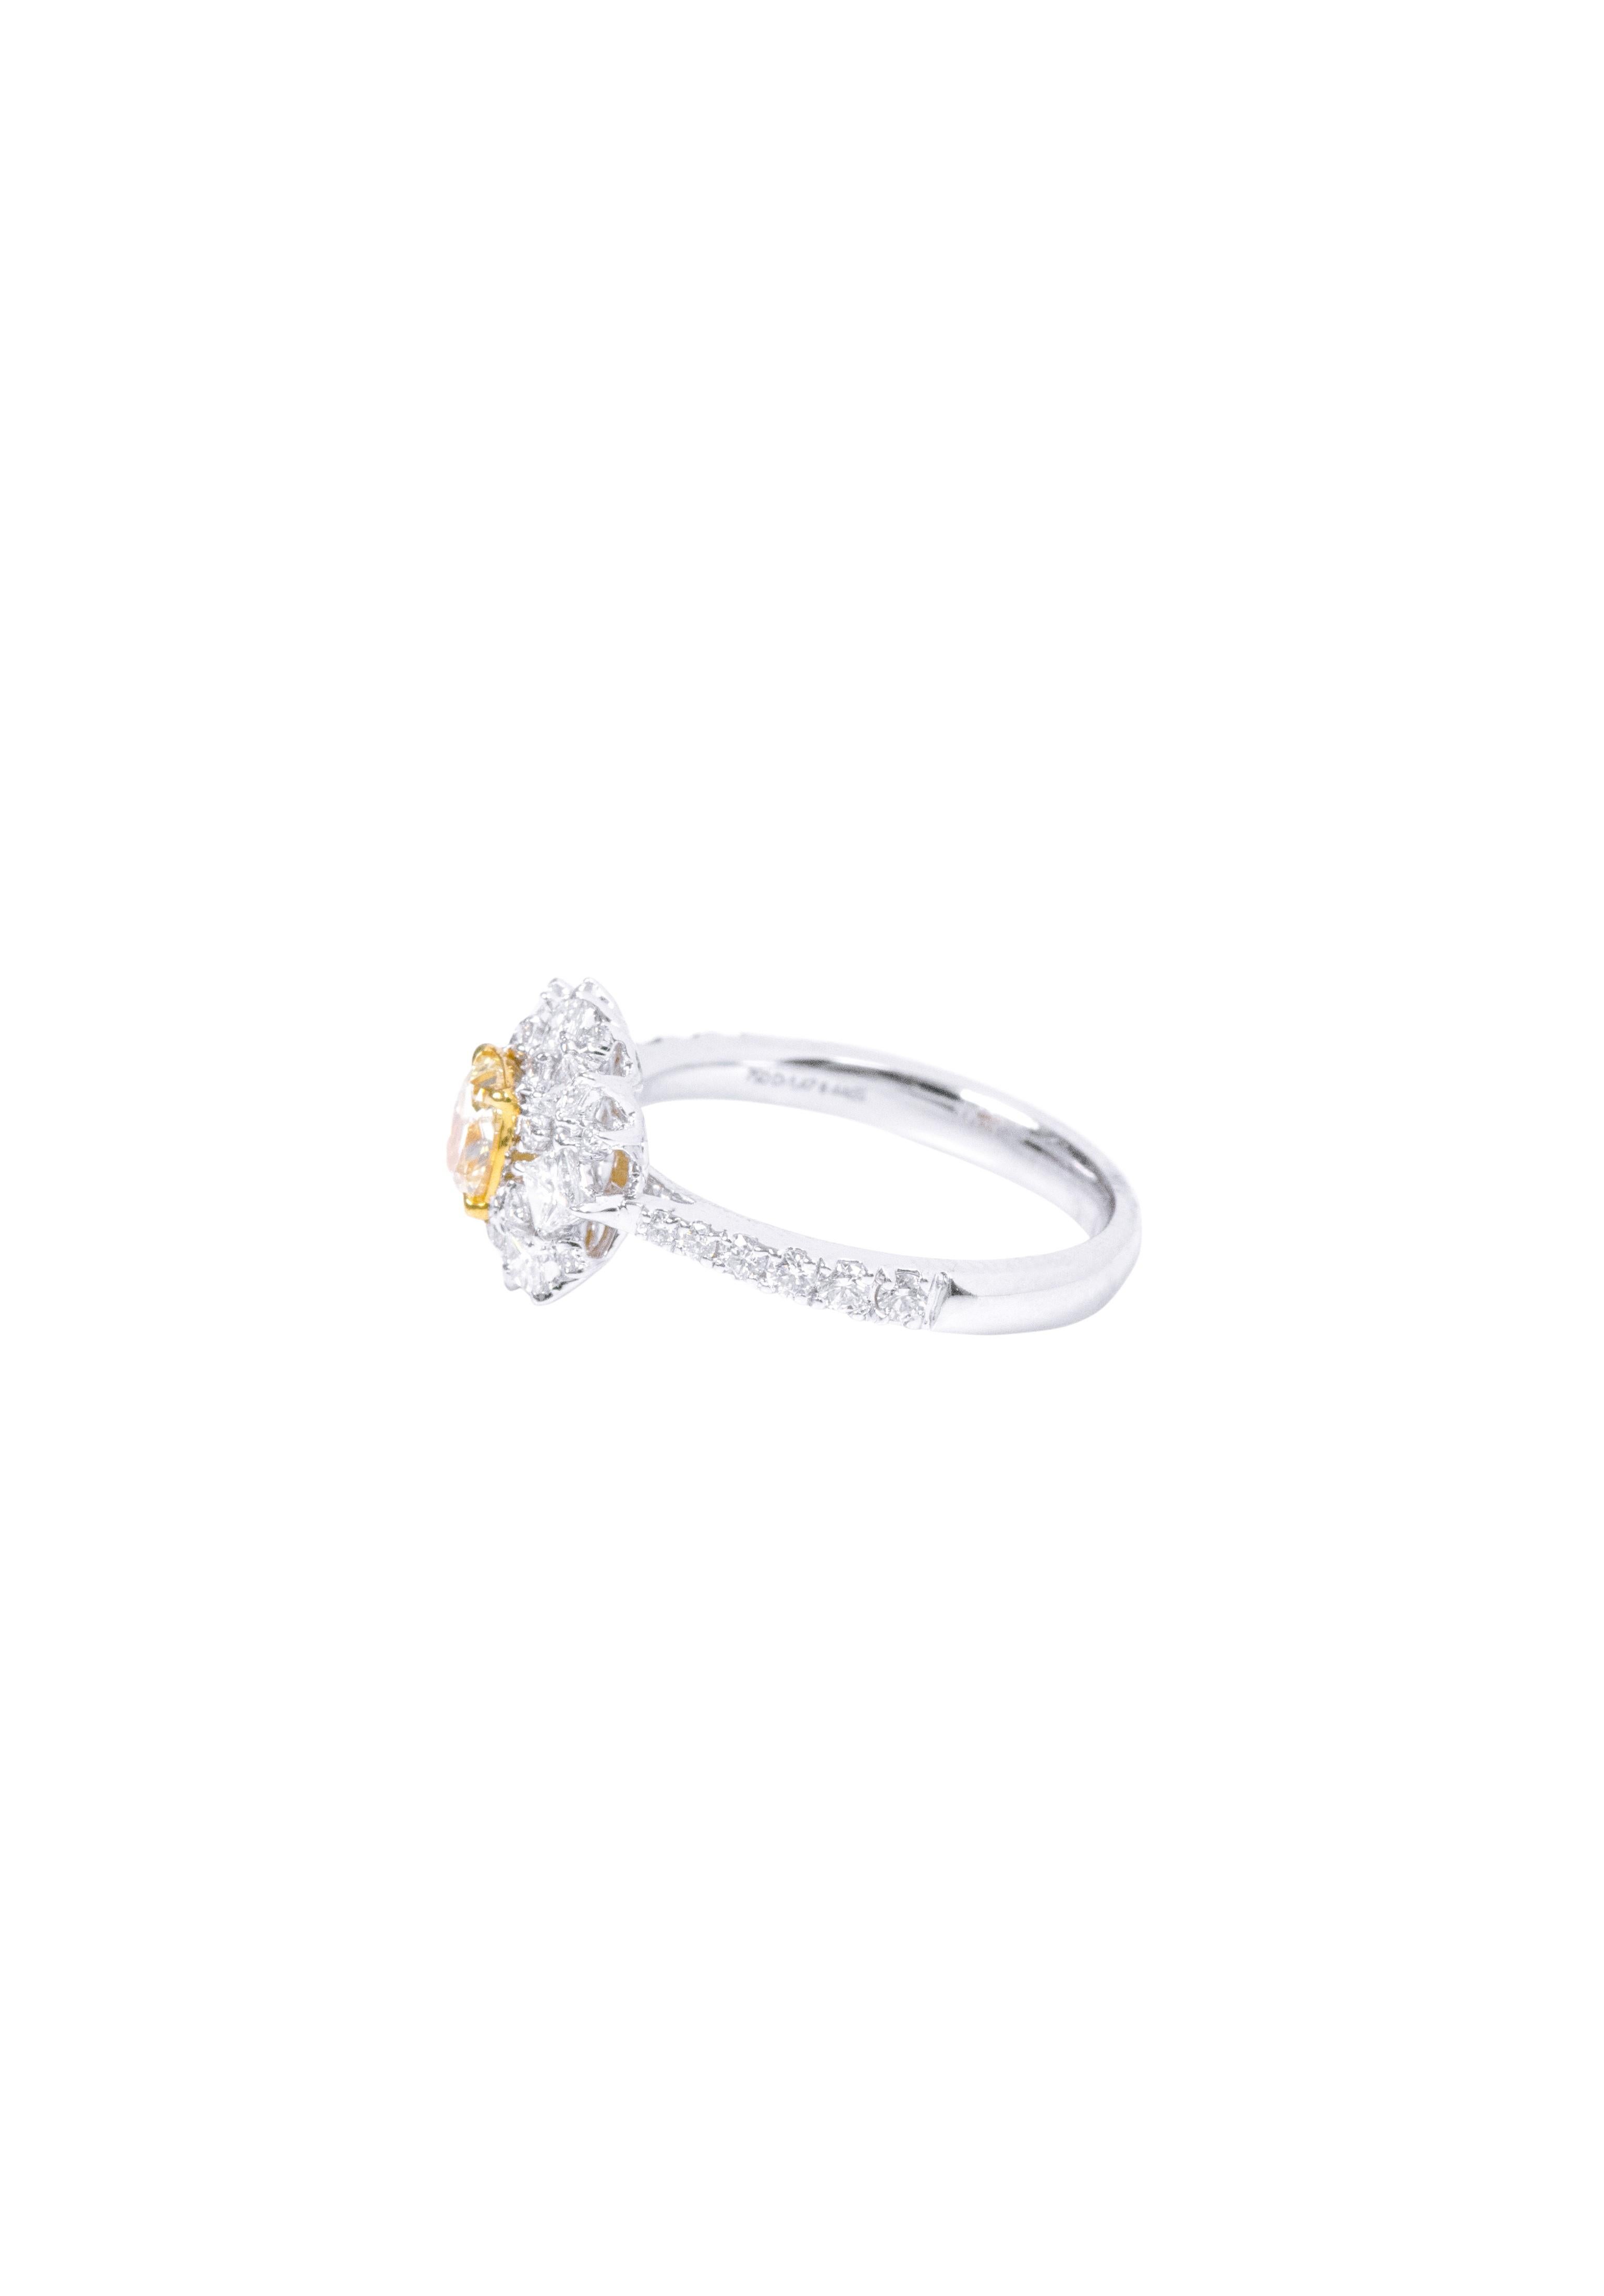 18 Karat Gold 1.48 Carat Fancy Yellow Diamond and Diamond Cocktail Ring 

At the heart of this cocktail ring, you'll find a carefully curated ensemble of diamonds, totaling 1.475 carats. These diamonds are strategically placed to create a central